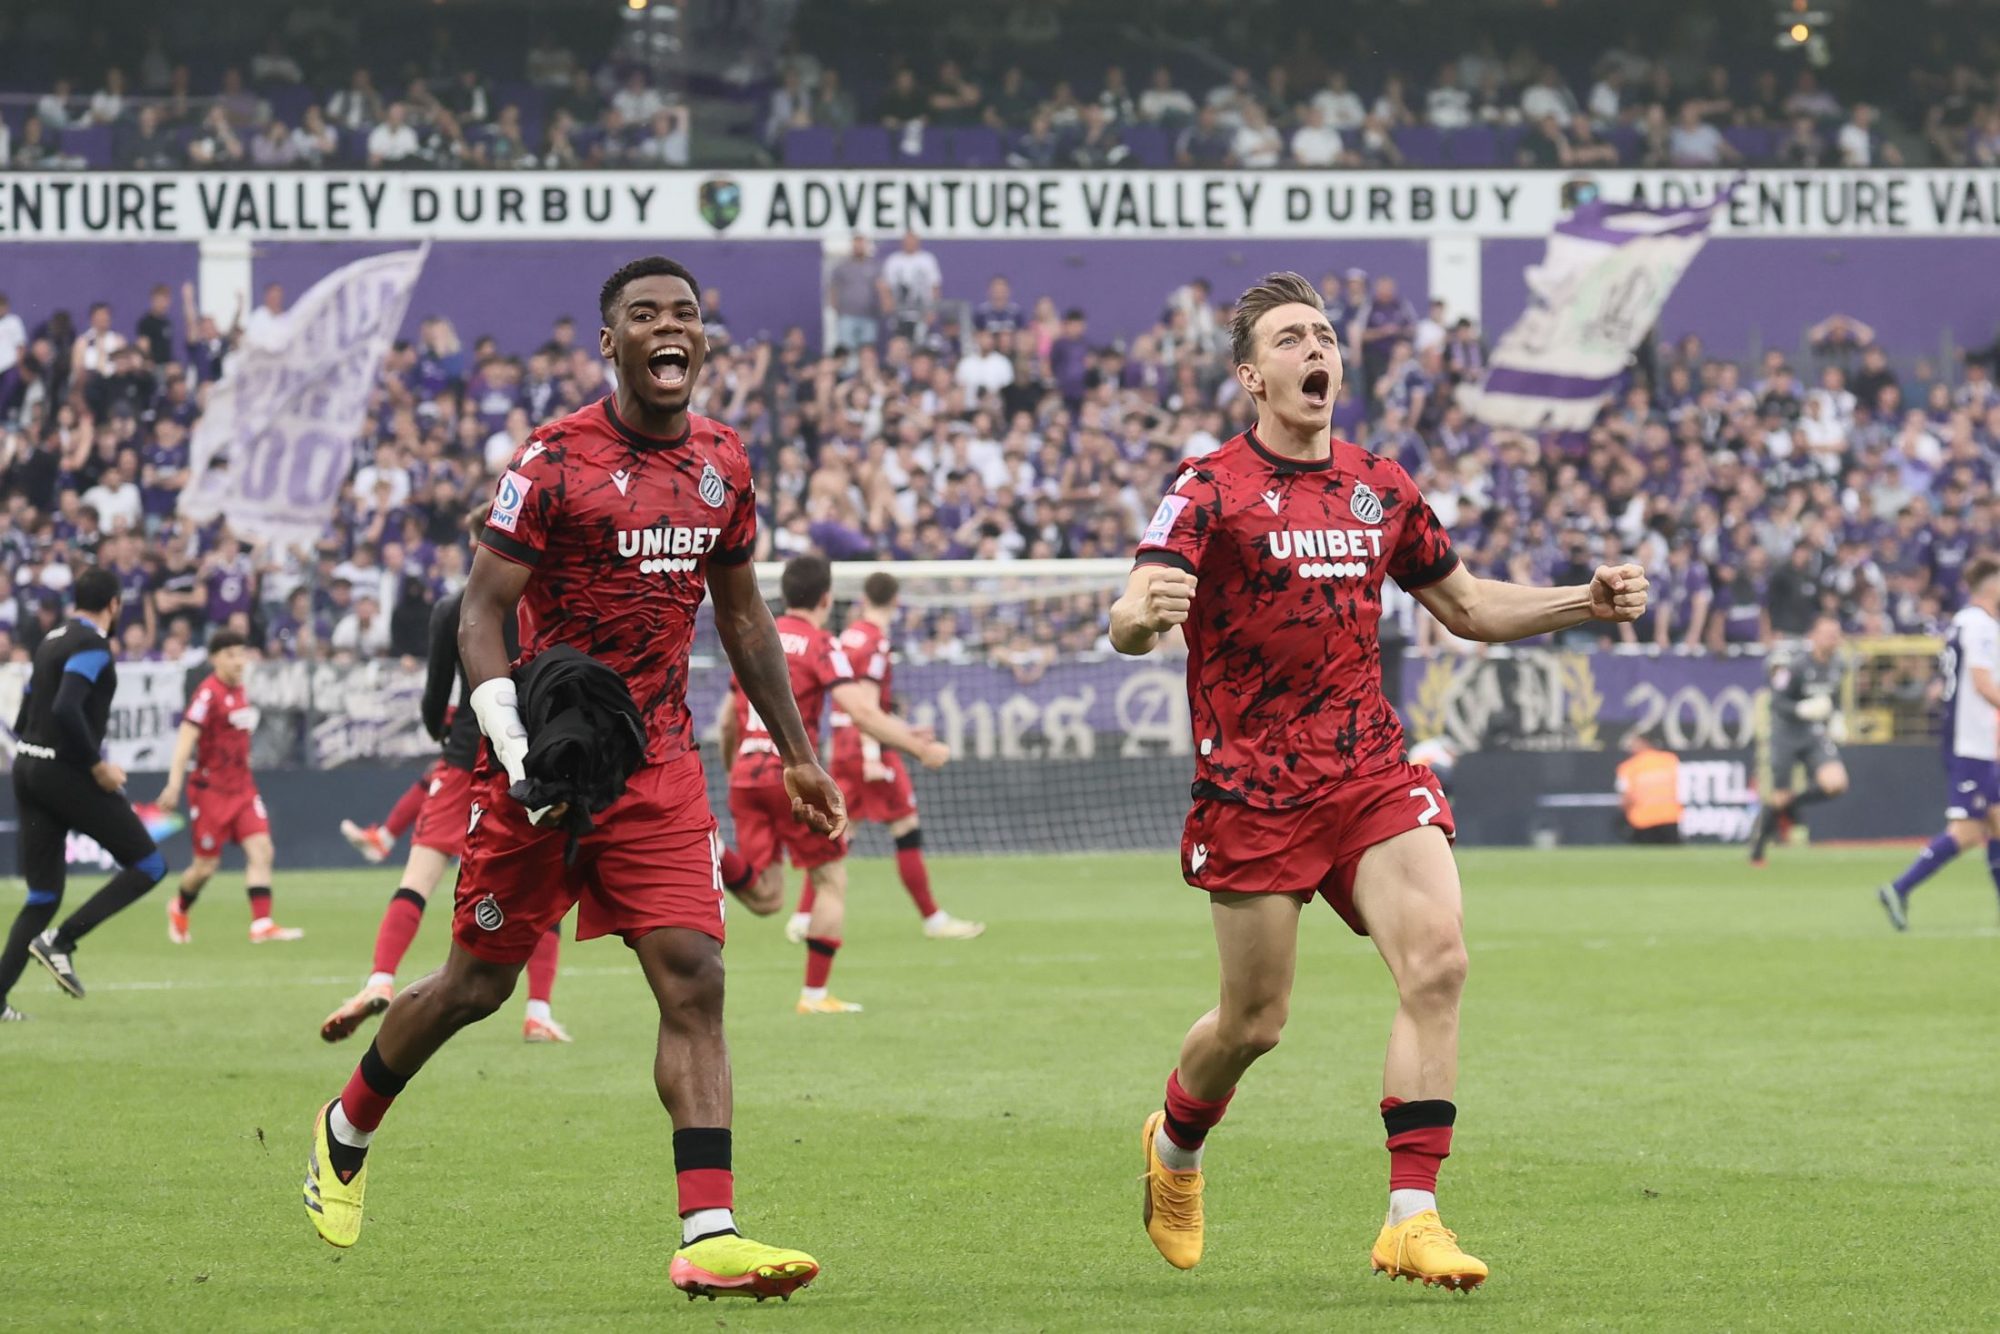 Club's players celebrate after winning a soccer match between RSC Anderlecht and Club Brugge, Sunday 19 May 2024 in Brussels, on day 9 (out of 10) of the Champions' Play-offs of the 2023-2024 'Jupiler Pro League' first division of the Belgian championship. At the start of the game, Rsca and Club Brugge lead the ranking with the same points. BELGA PHOTO BRUNO FAHY